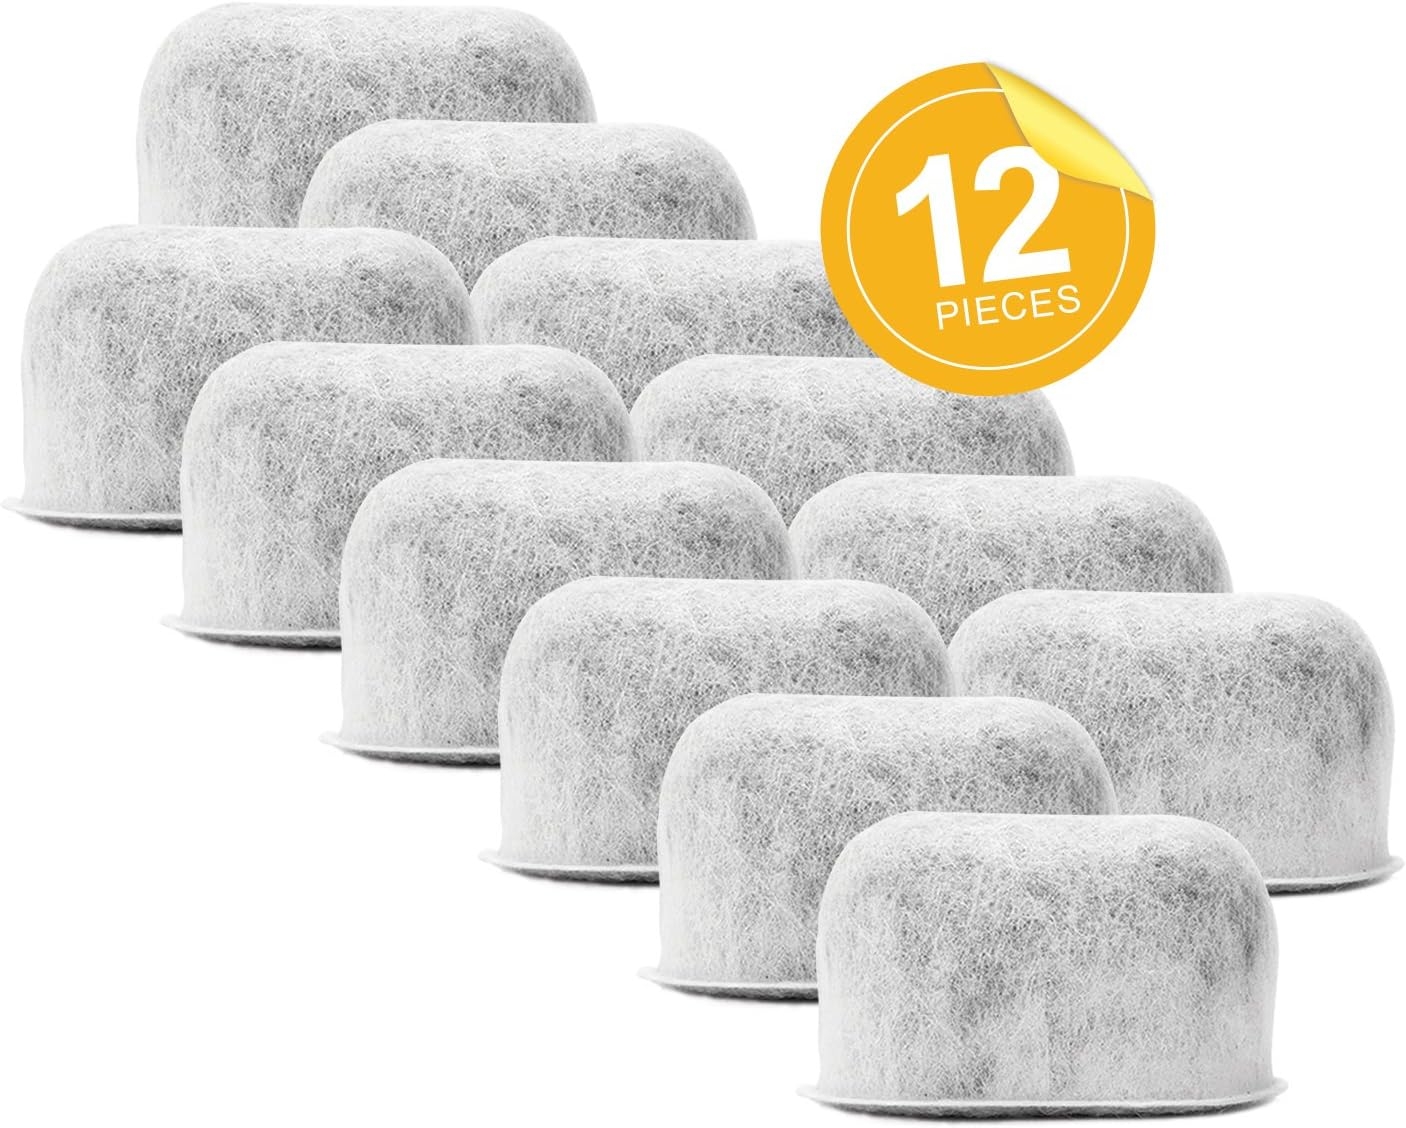 Pack of 12 Replacement Charcoal Water Filters By Housewares Solutions For Keurig 2.0 Brewers